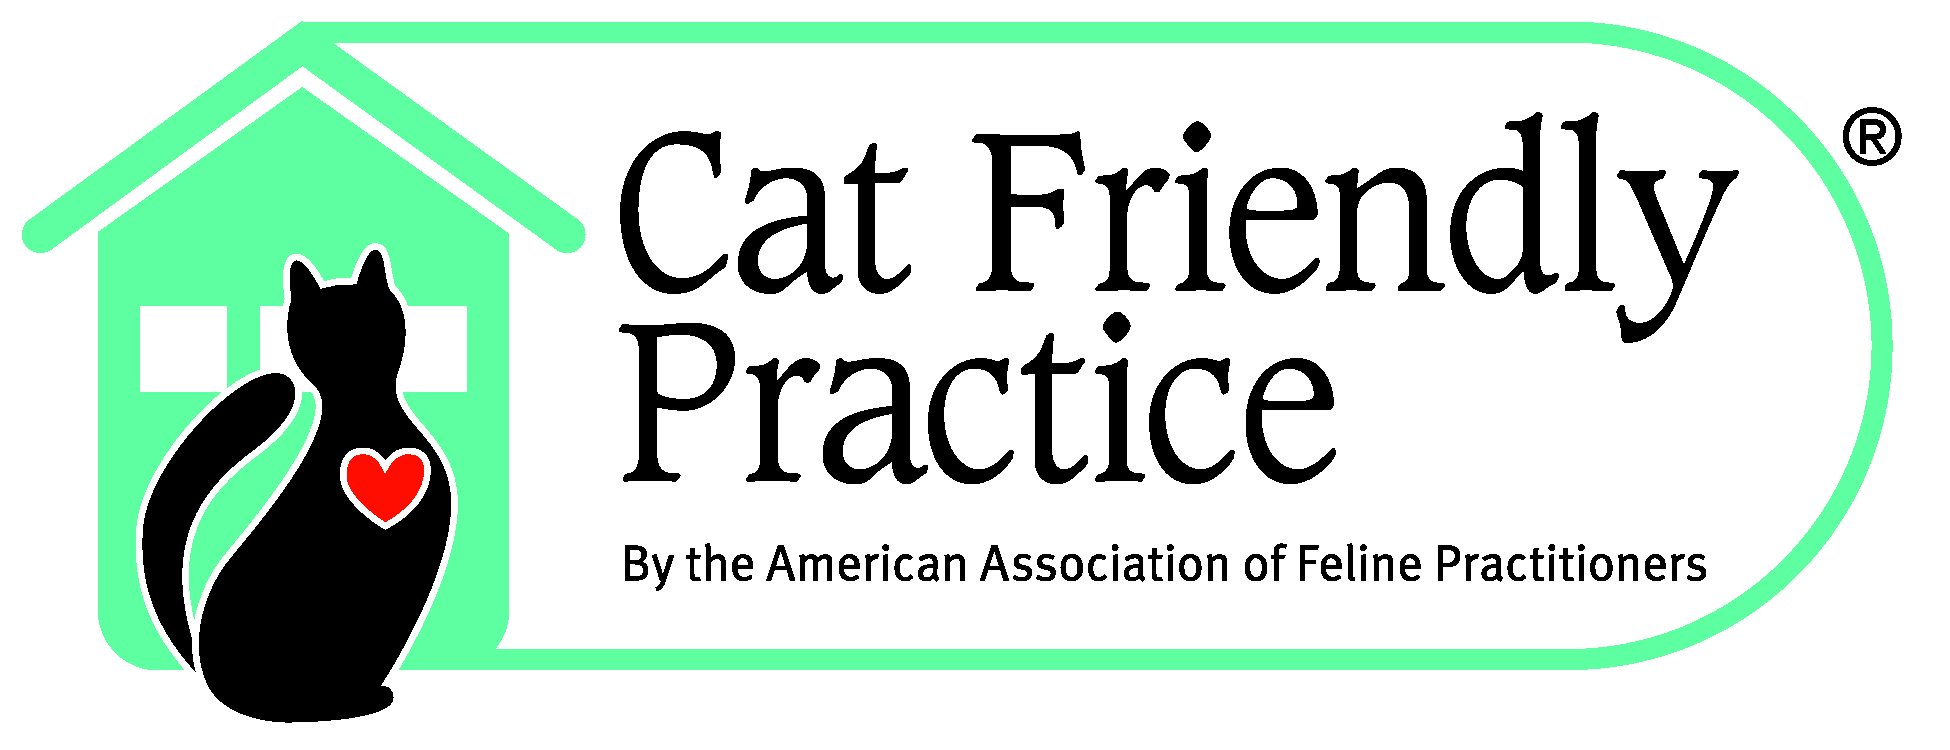 cat friendly veterinary guidelines